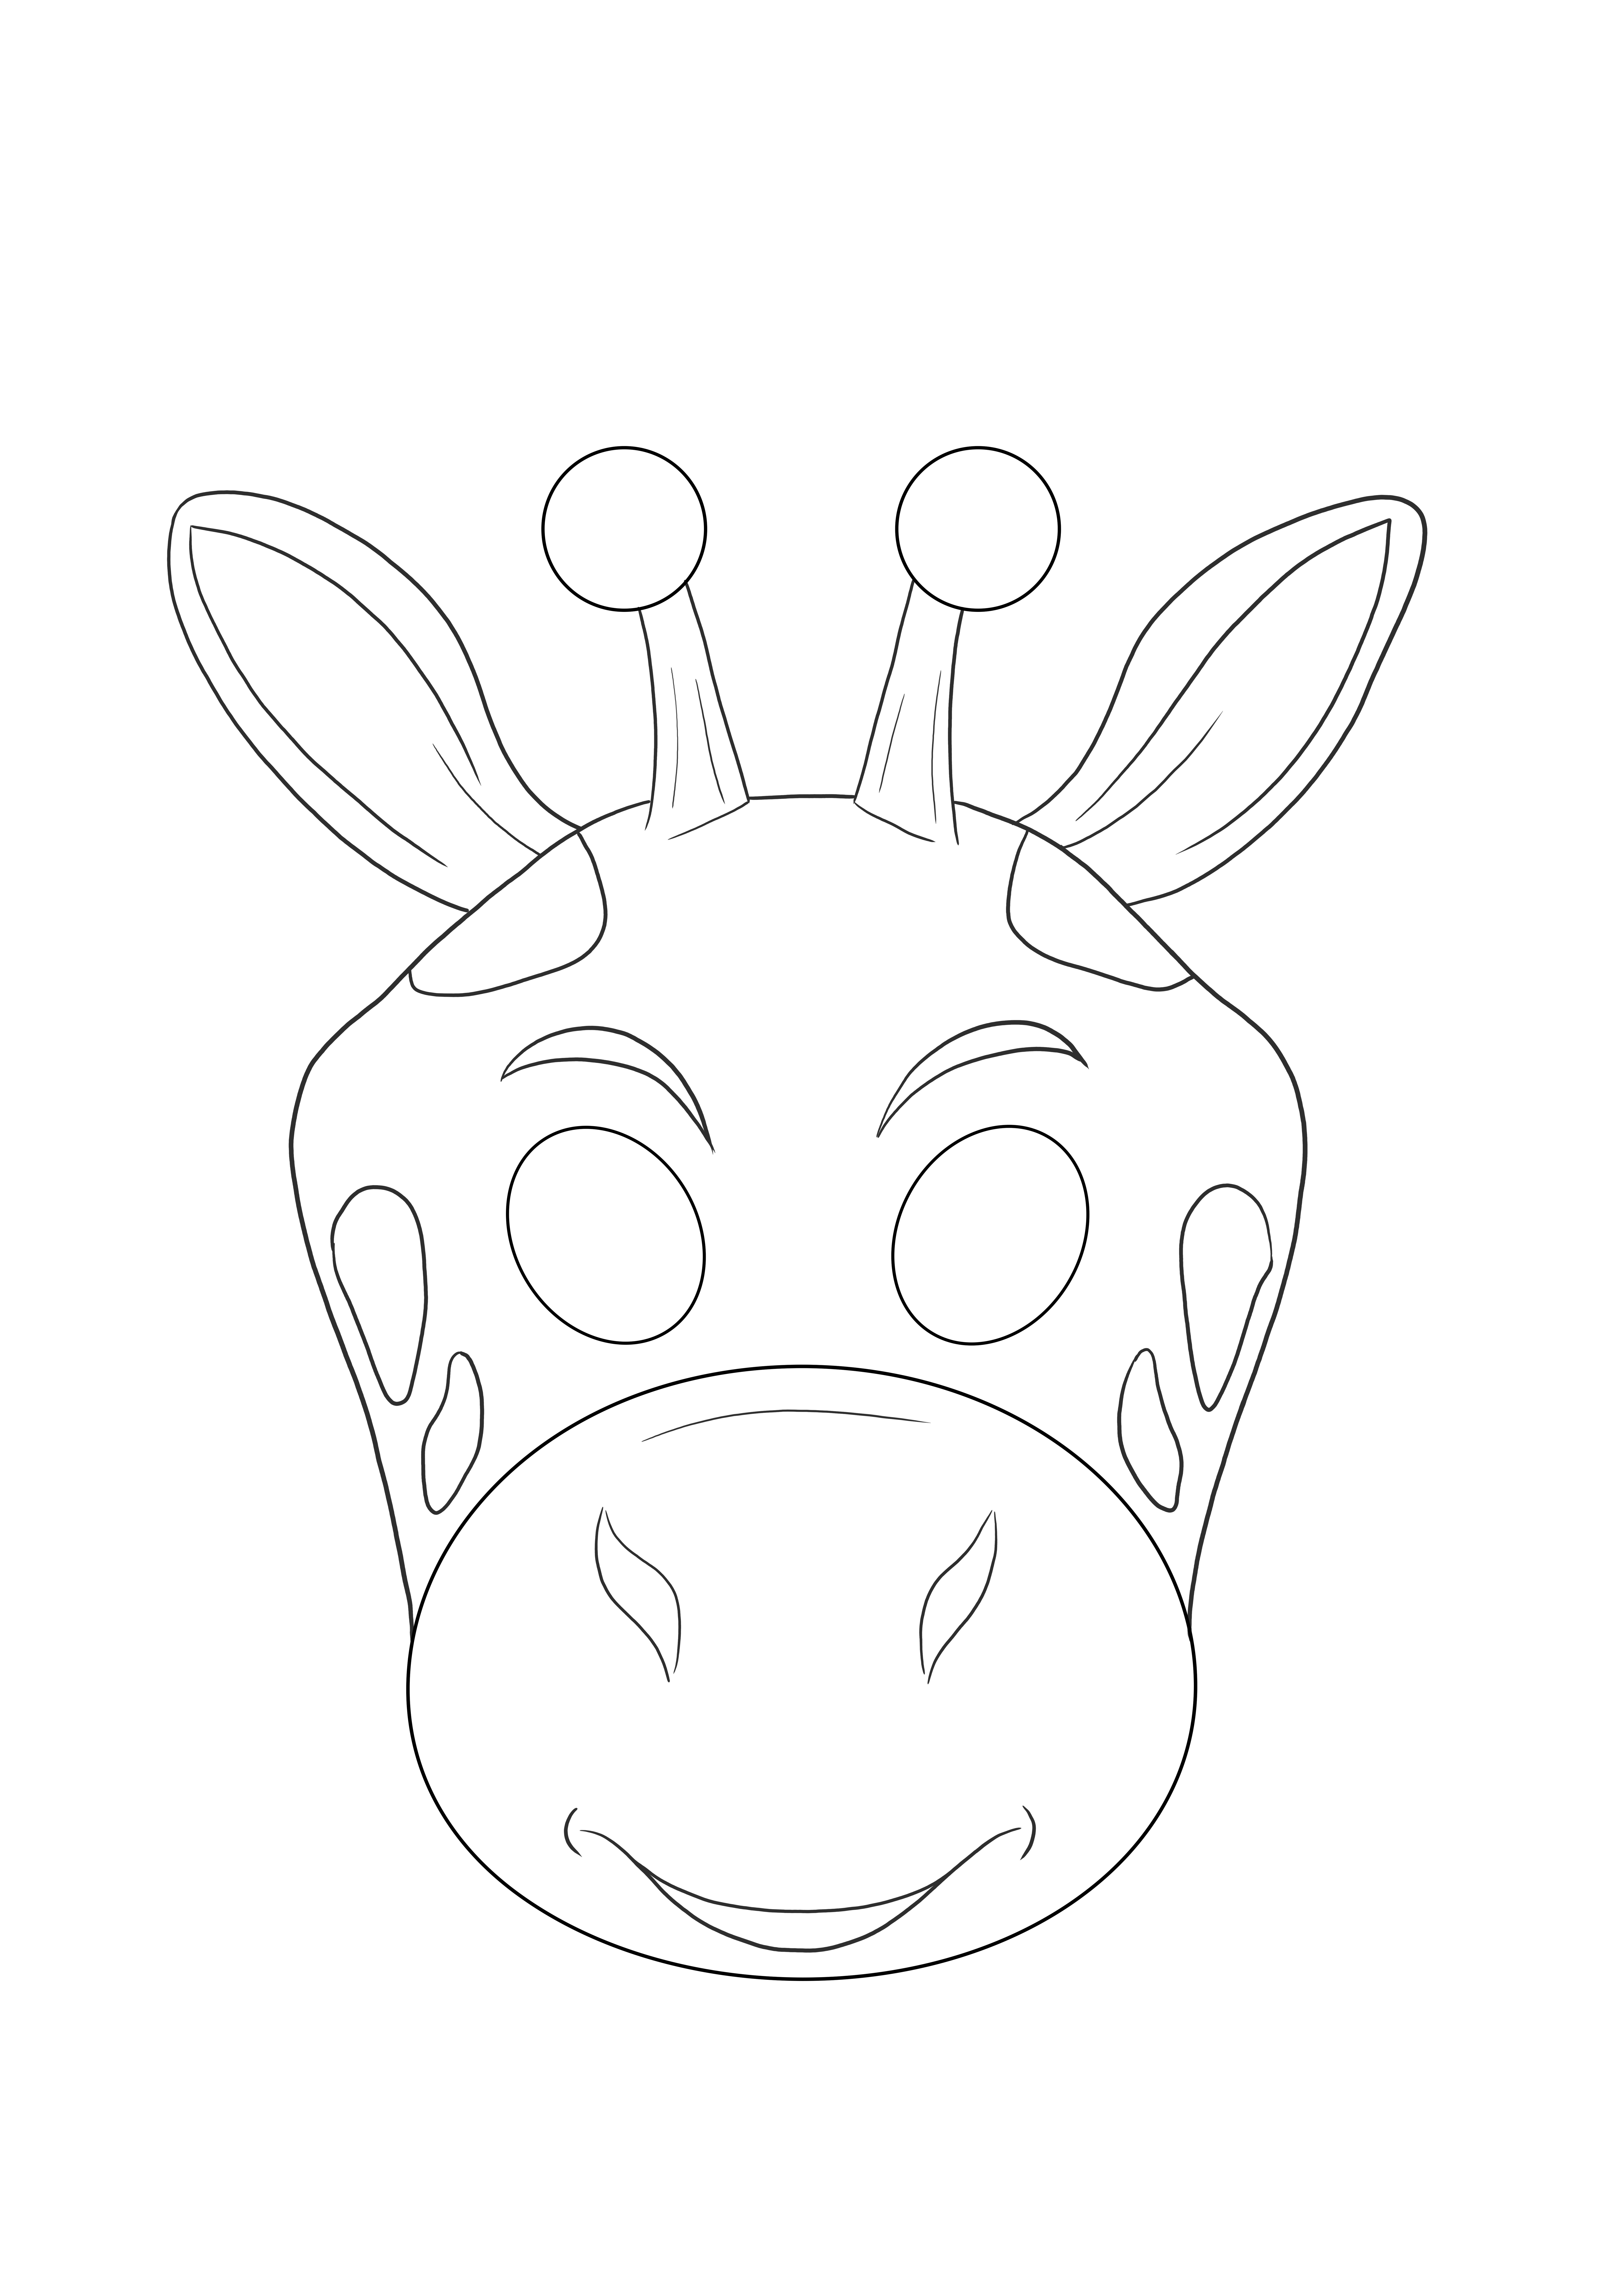 Giraffe mask simply to print or save for later for kids to color